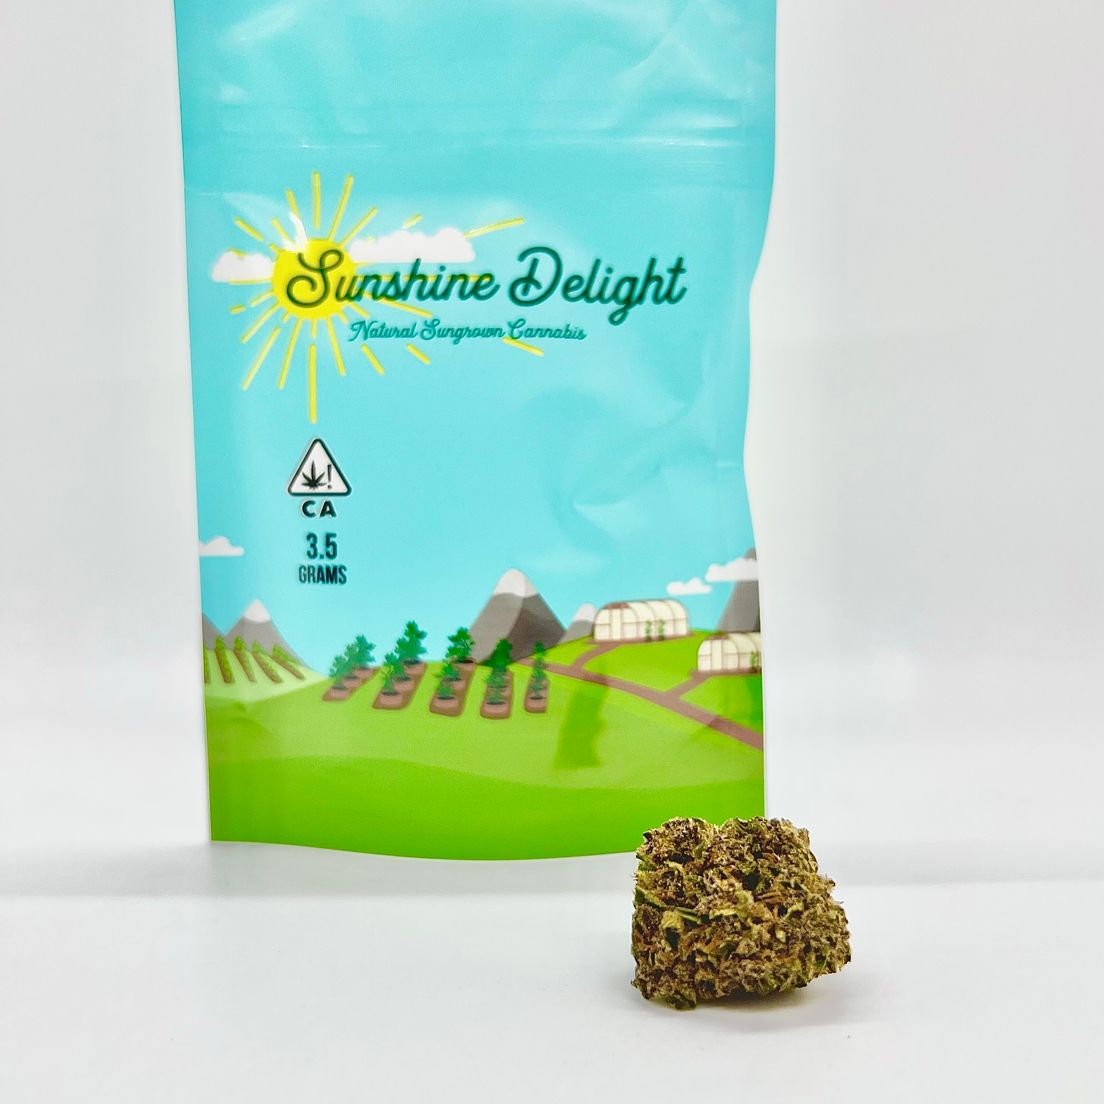 *BLOWOUT DEAL! $10 1/8 Rhyno Cookies (25.82%/Hybrid - Indica Dom.) - Sunshine Delight